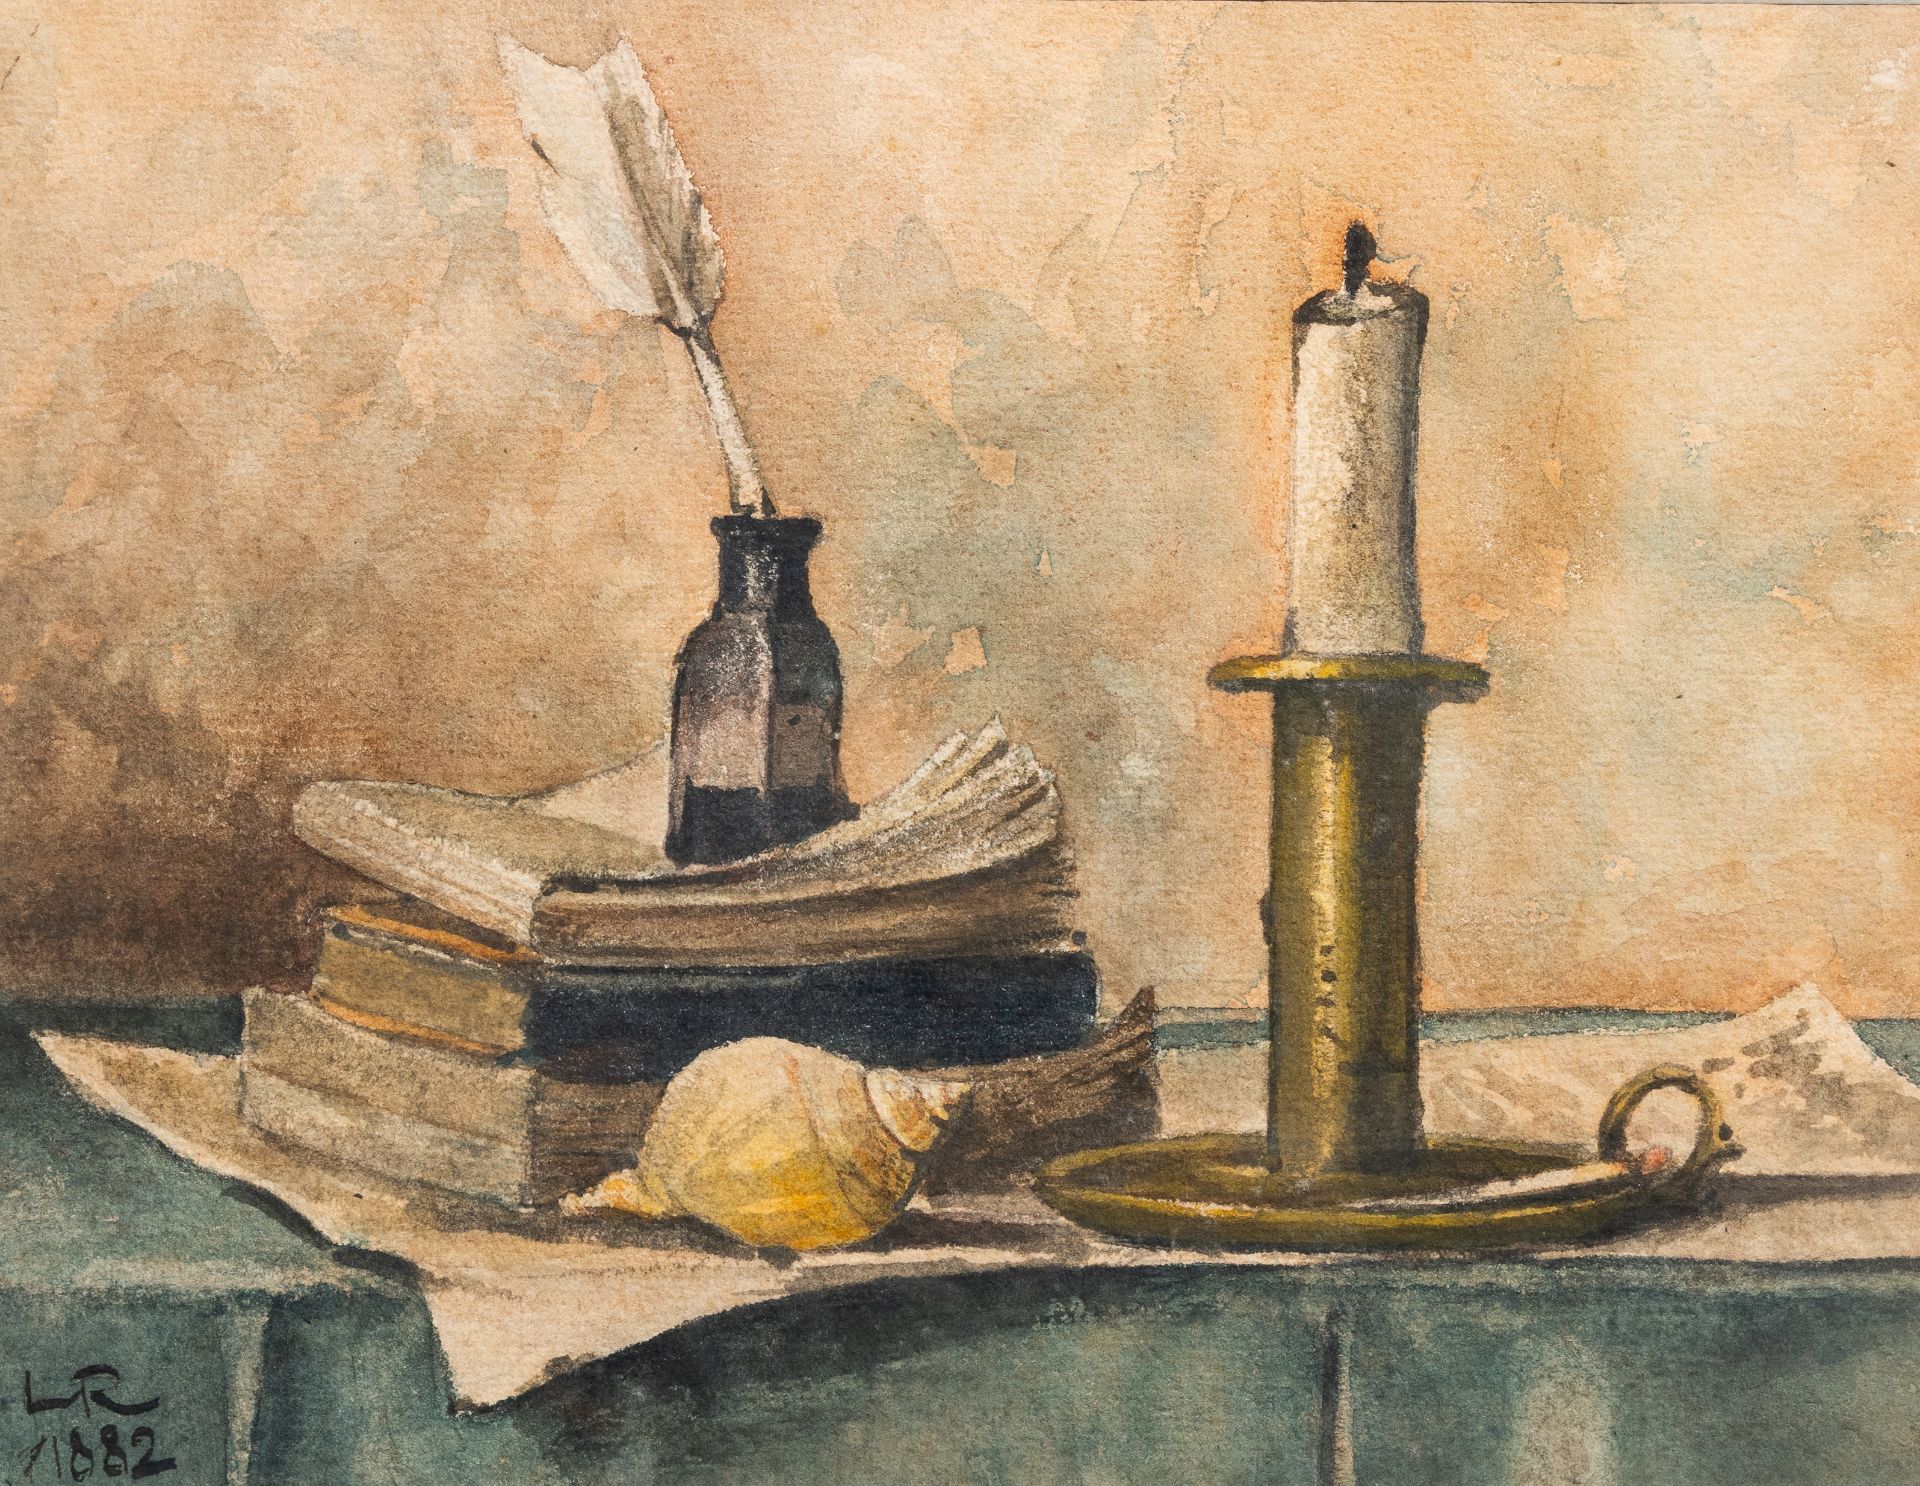 Louis Joseph Reckelbus (1864-1958): Two still lifes, mixed media on paper, dated 1882 and 1885 - Image 2 of 4